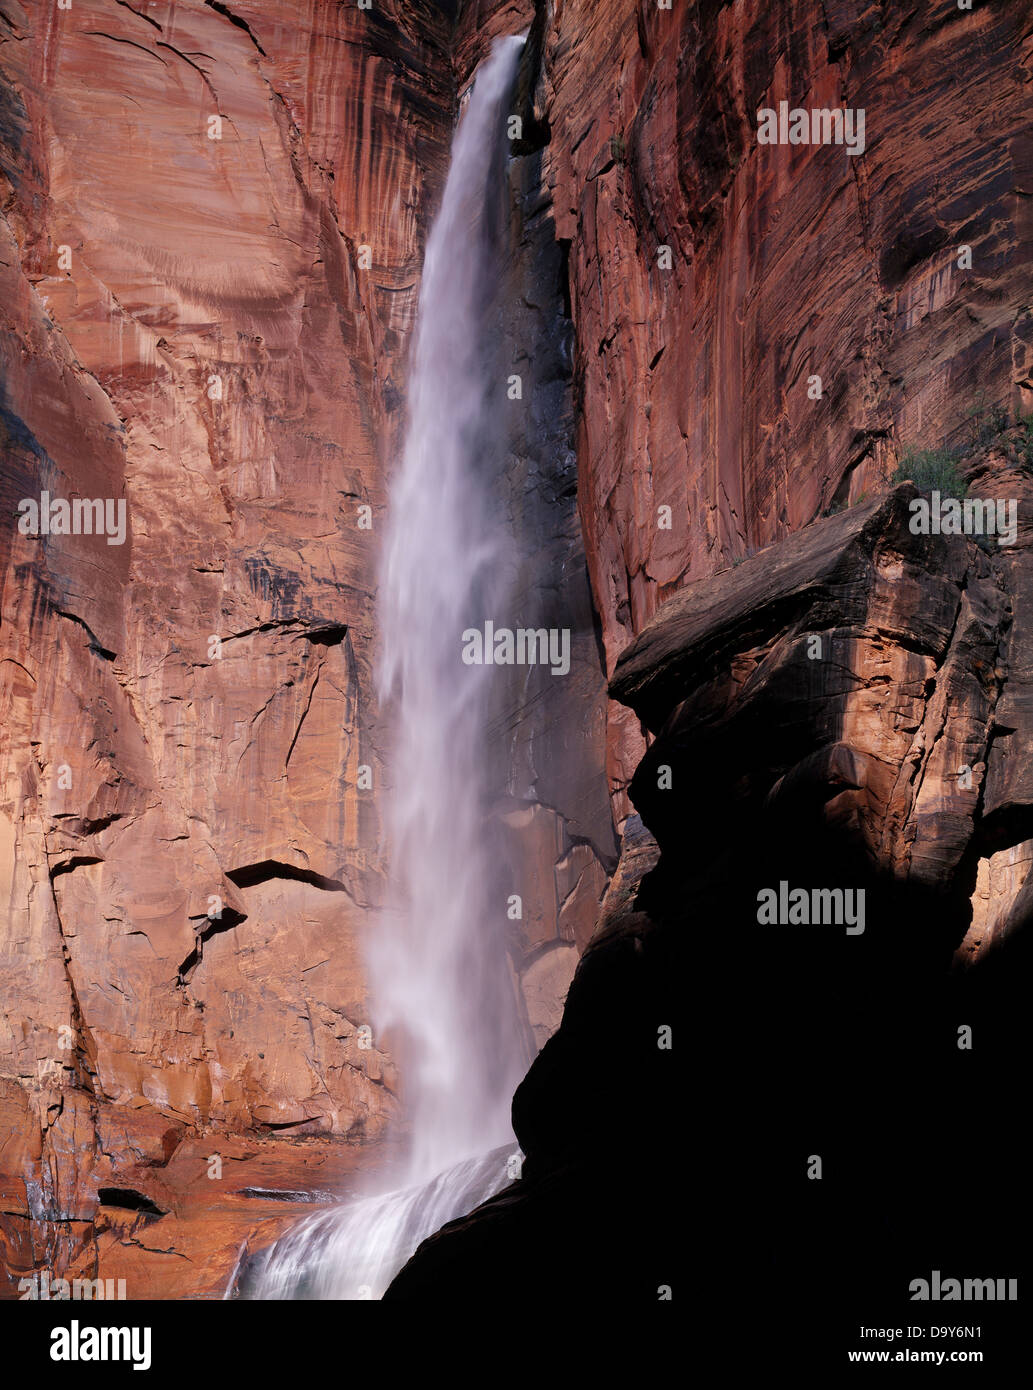 Ephemeral waterfall from spring snow melt at the Temple of Sinawava, Zion National Park, Utah. Stock Photo